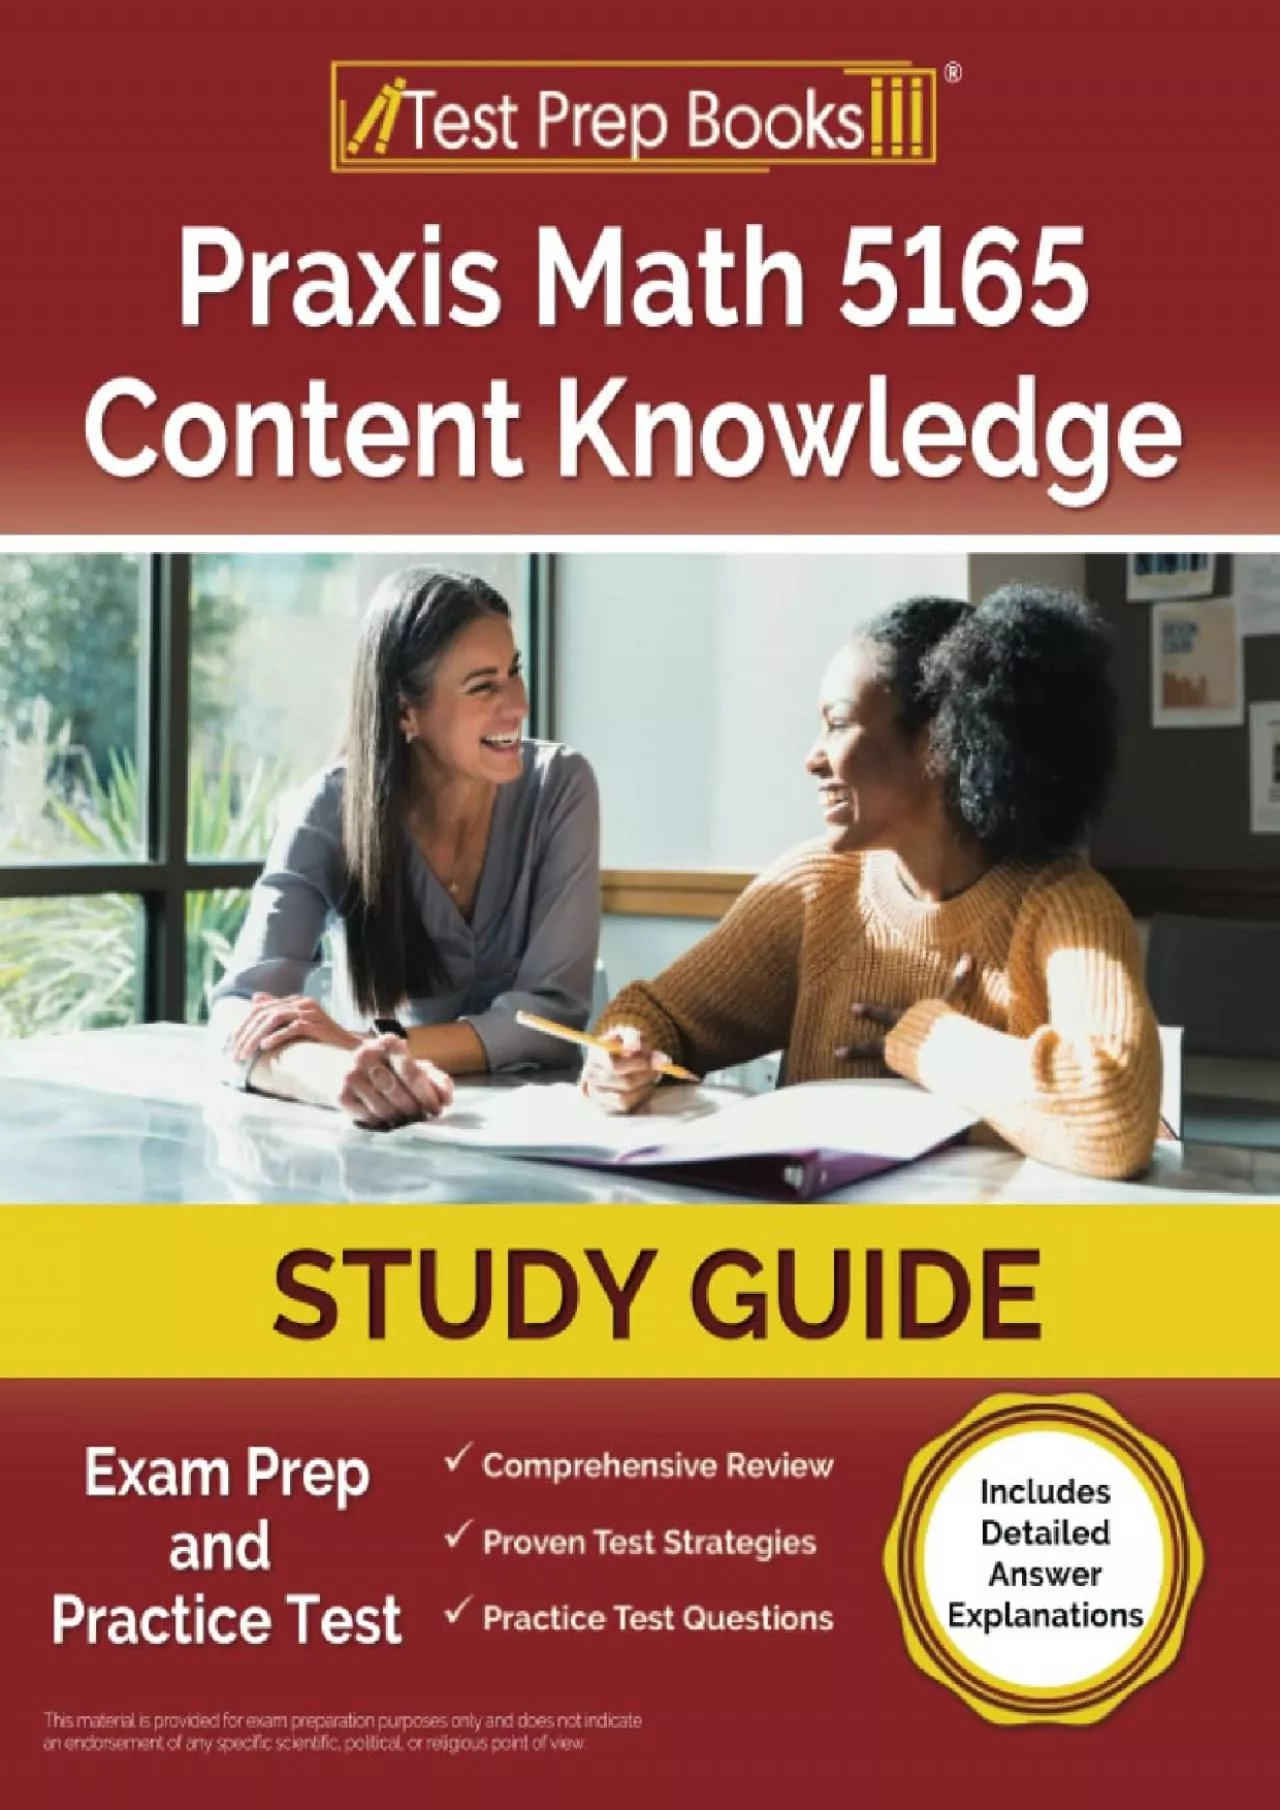 [EBOOK] Praxis Math 5165 Content Knowledge Study Guide: Exam Prep and Practice Test [Includes